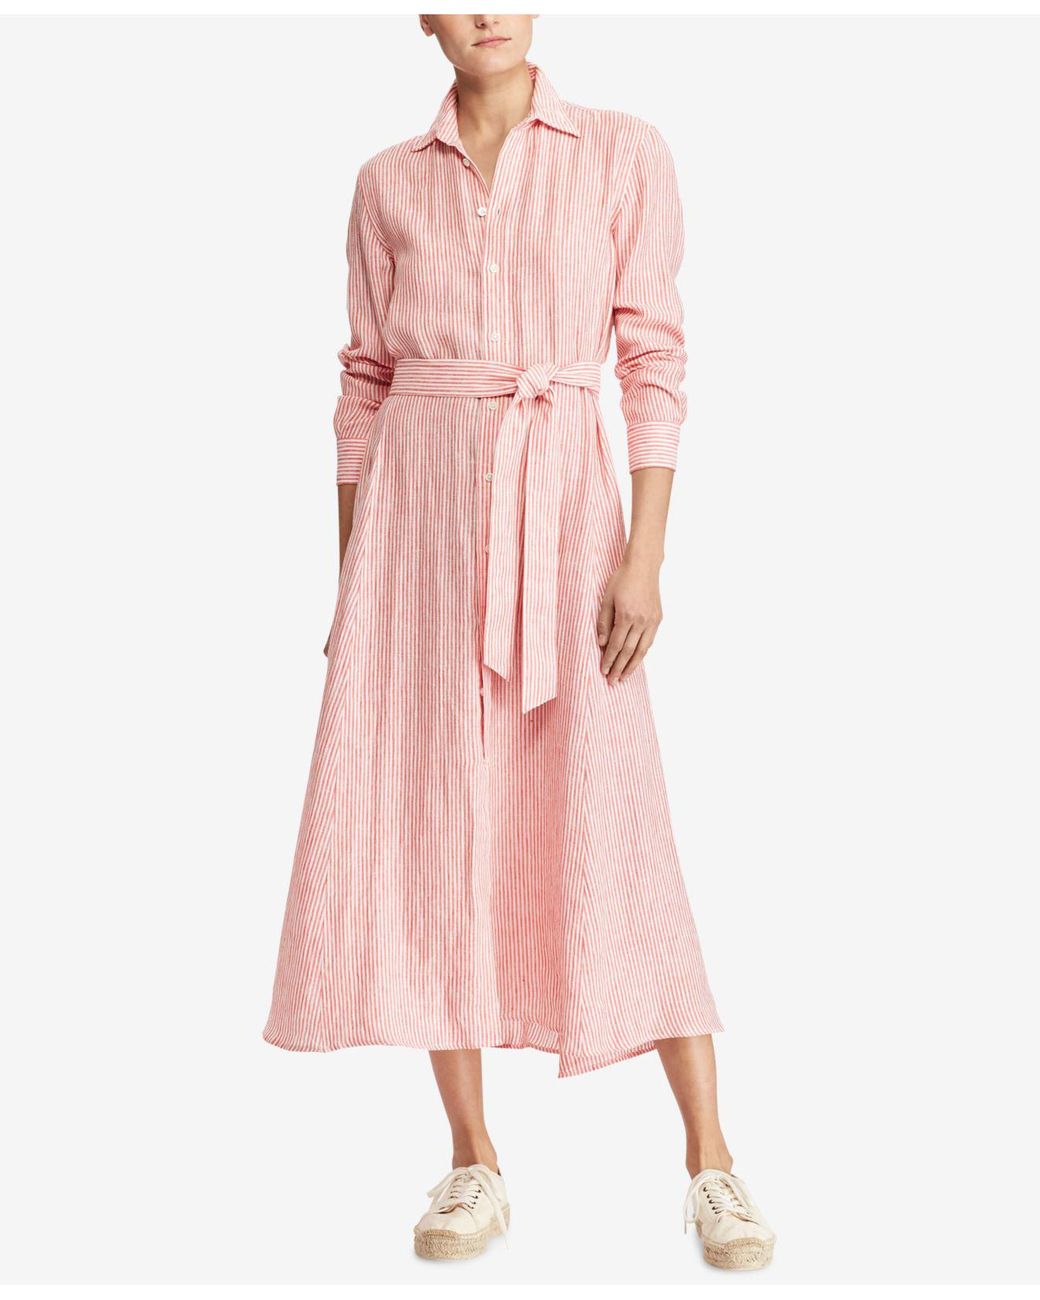 Polo Ralph Lauren Striped Linen Shirtdress in Red/White (Pink) | Lyst